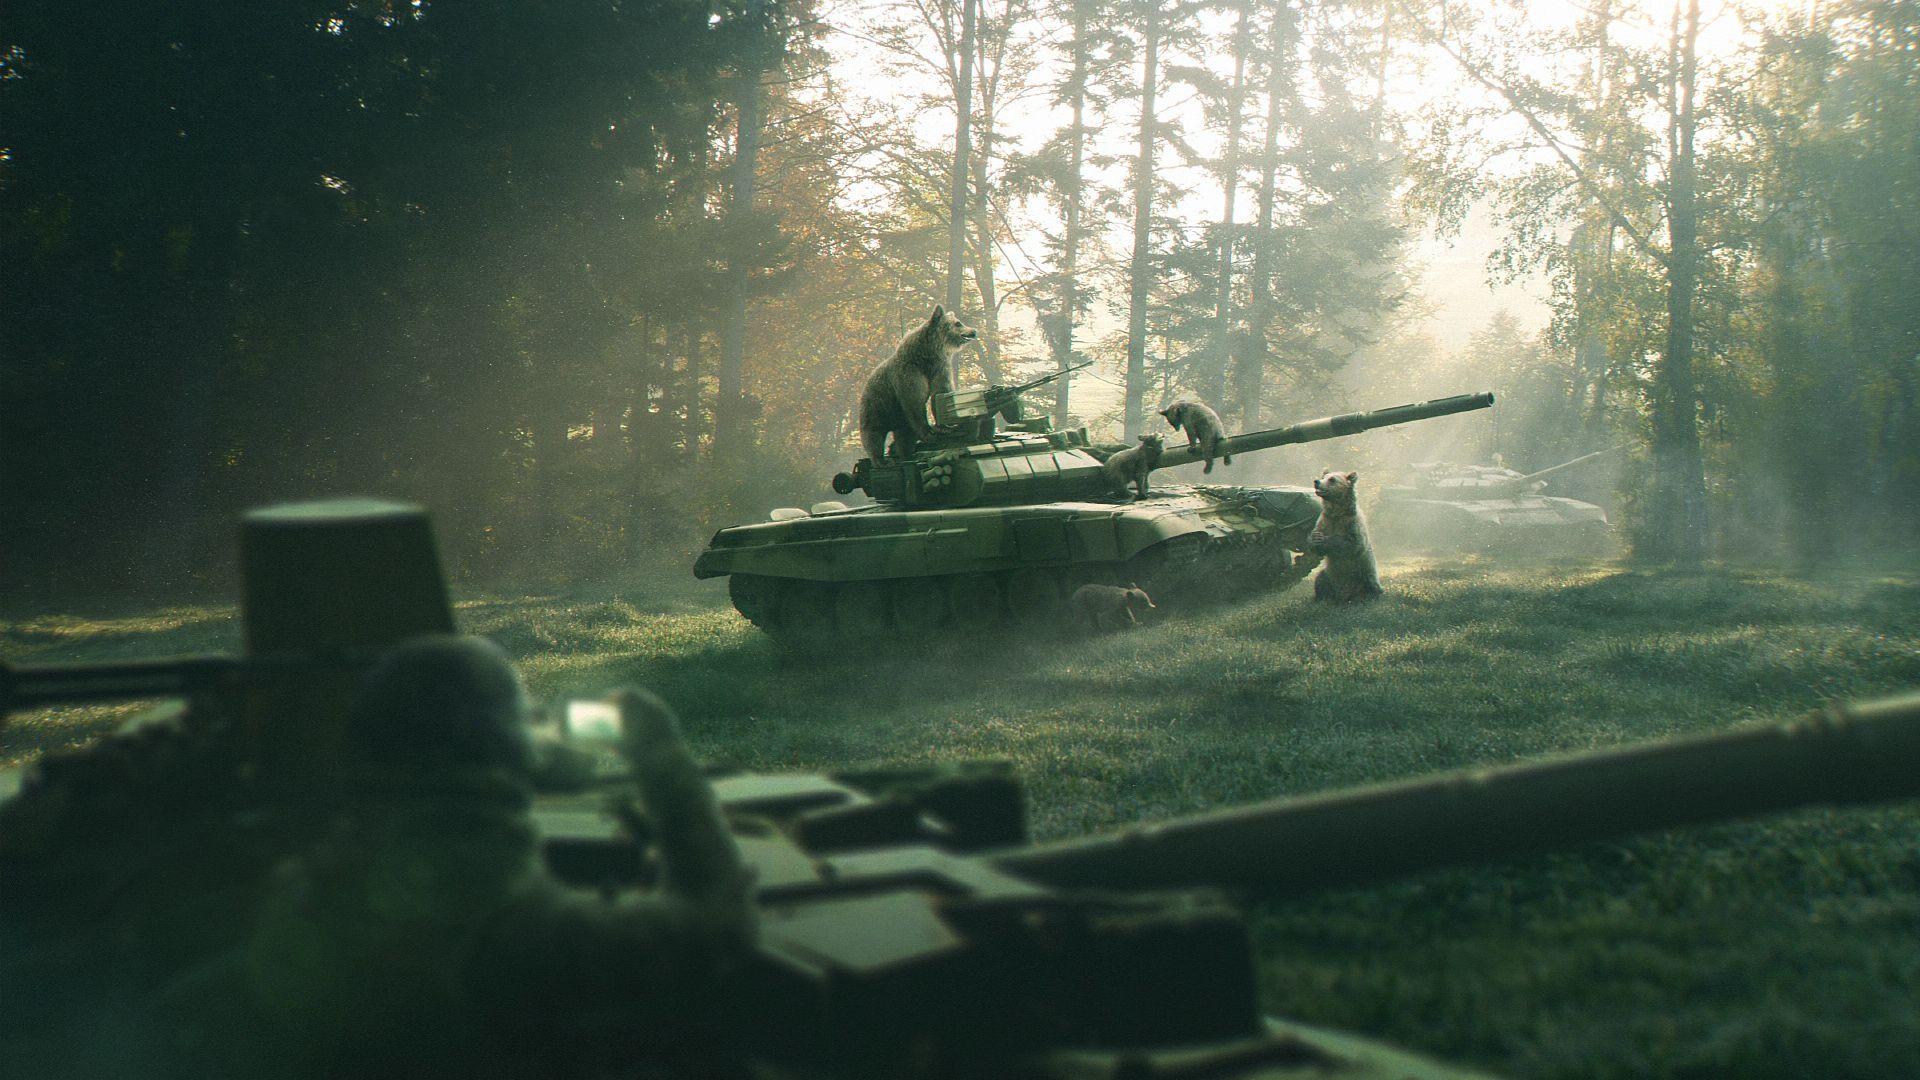 soldier, Bears, Baby animals, Tank, Wood, Sun rays, Weapon, T 90 Wallpaper